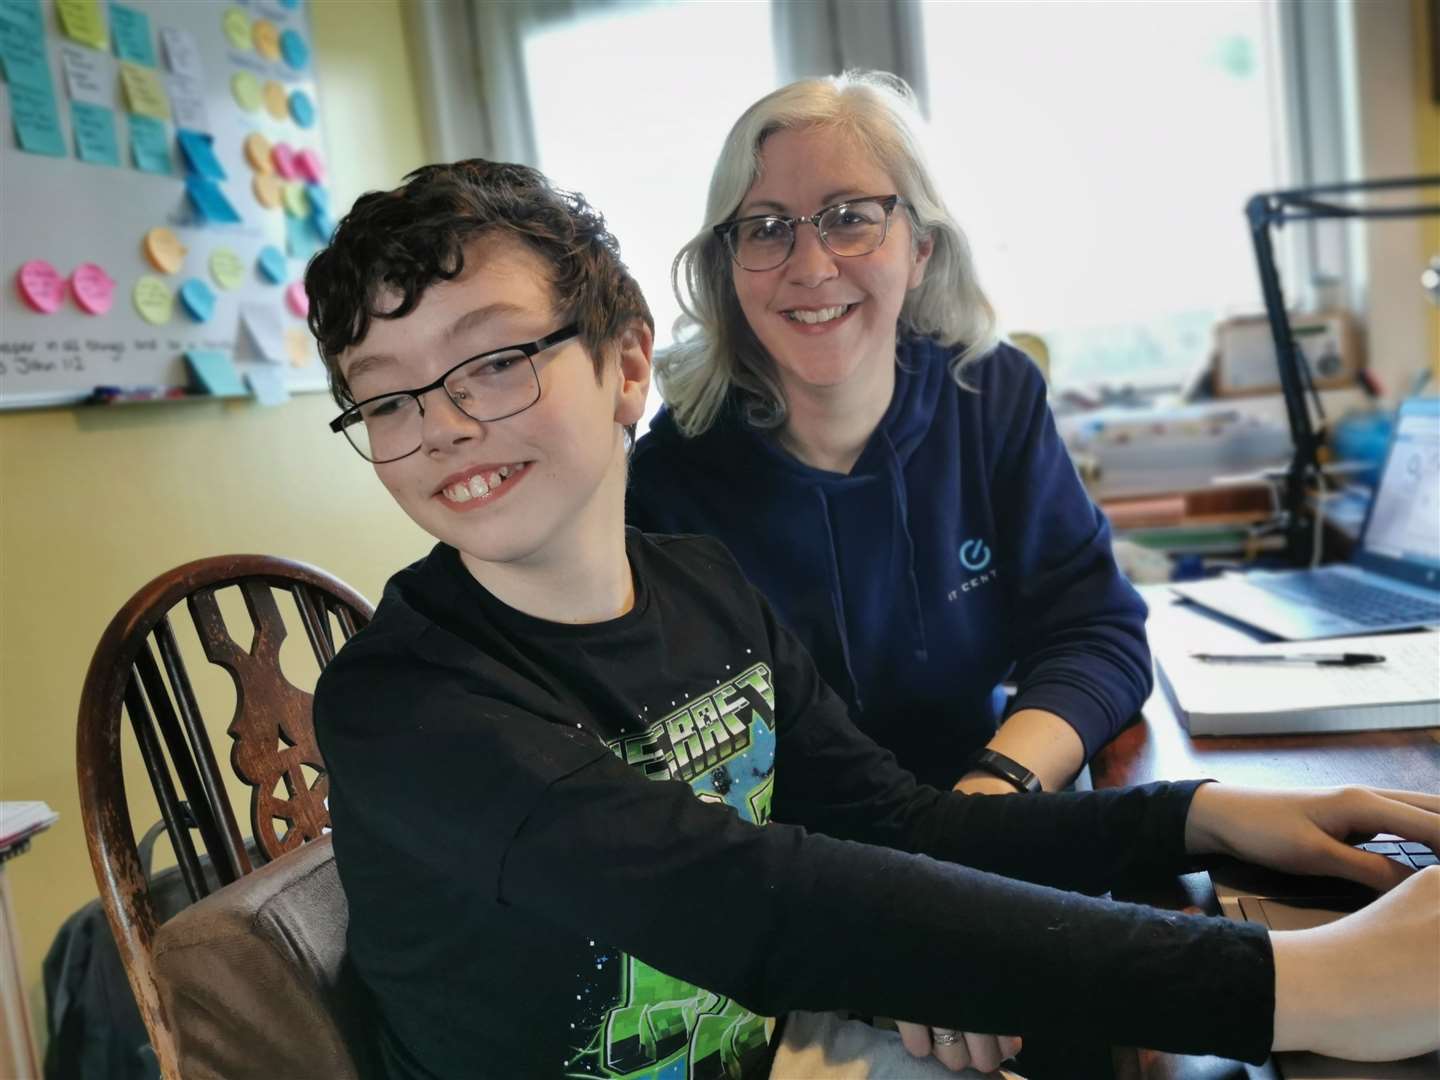 Lee Midlane, founder and CEO of Elgin-based IT Central, with her son, Josh.